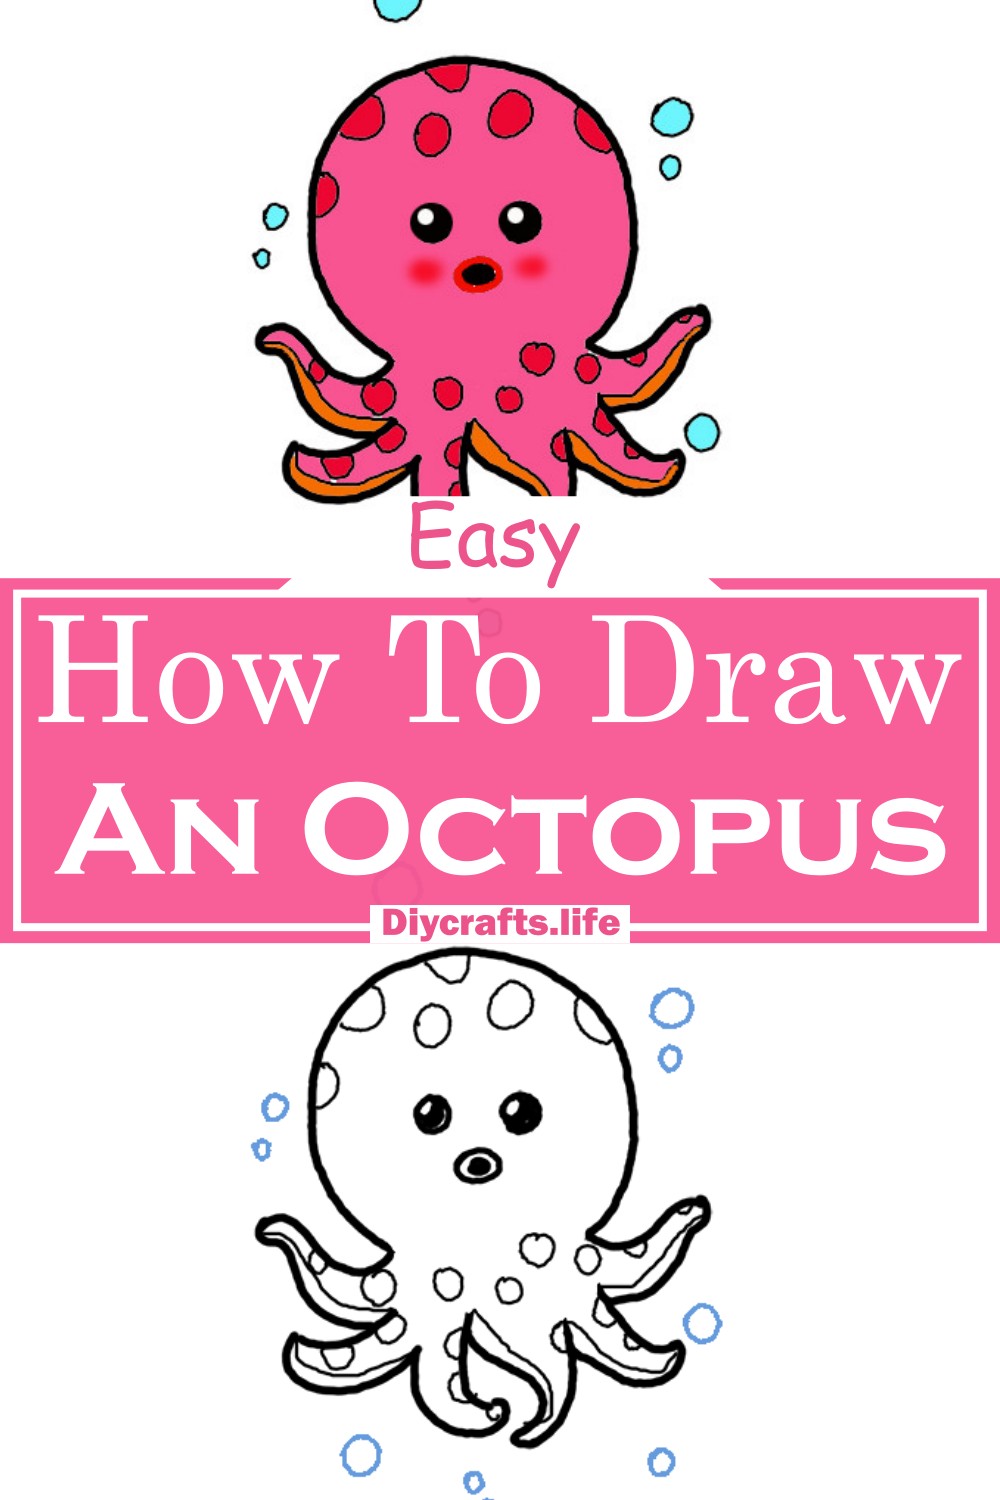 How To Draw An Octopus 2